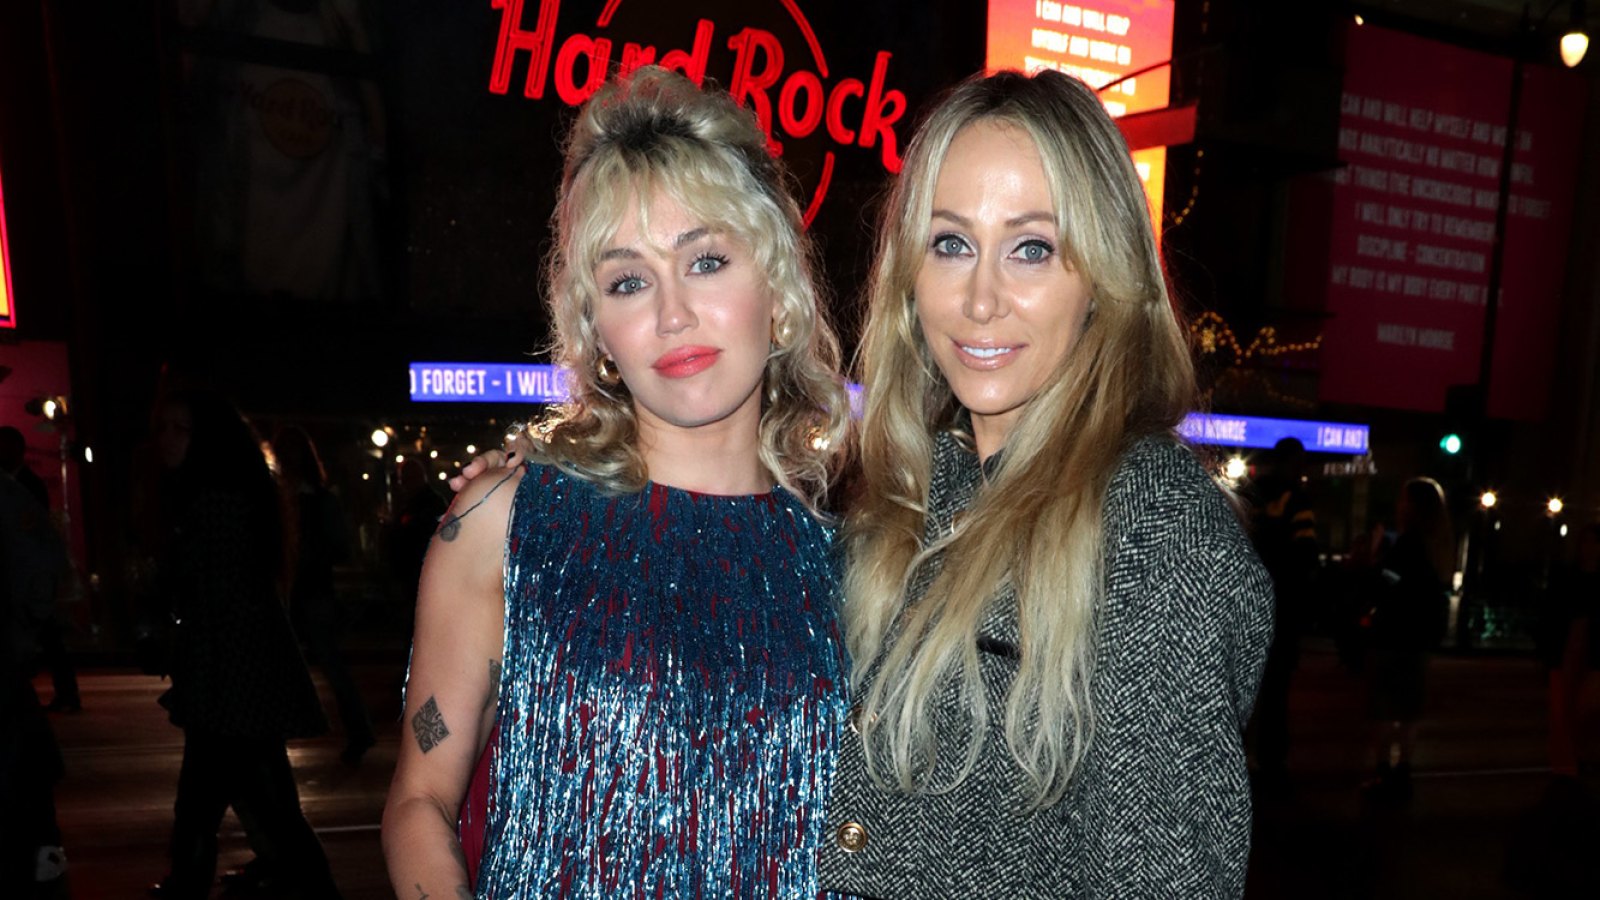 Miley Cyrus Is 'So Grateful' Tish Cyrus Found Fiance Dominic Purcell After Split From Billy Ray Cyrus: She 'Only Wants the Best for Her Mom'